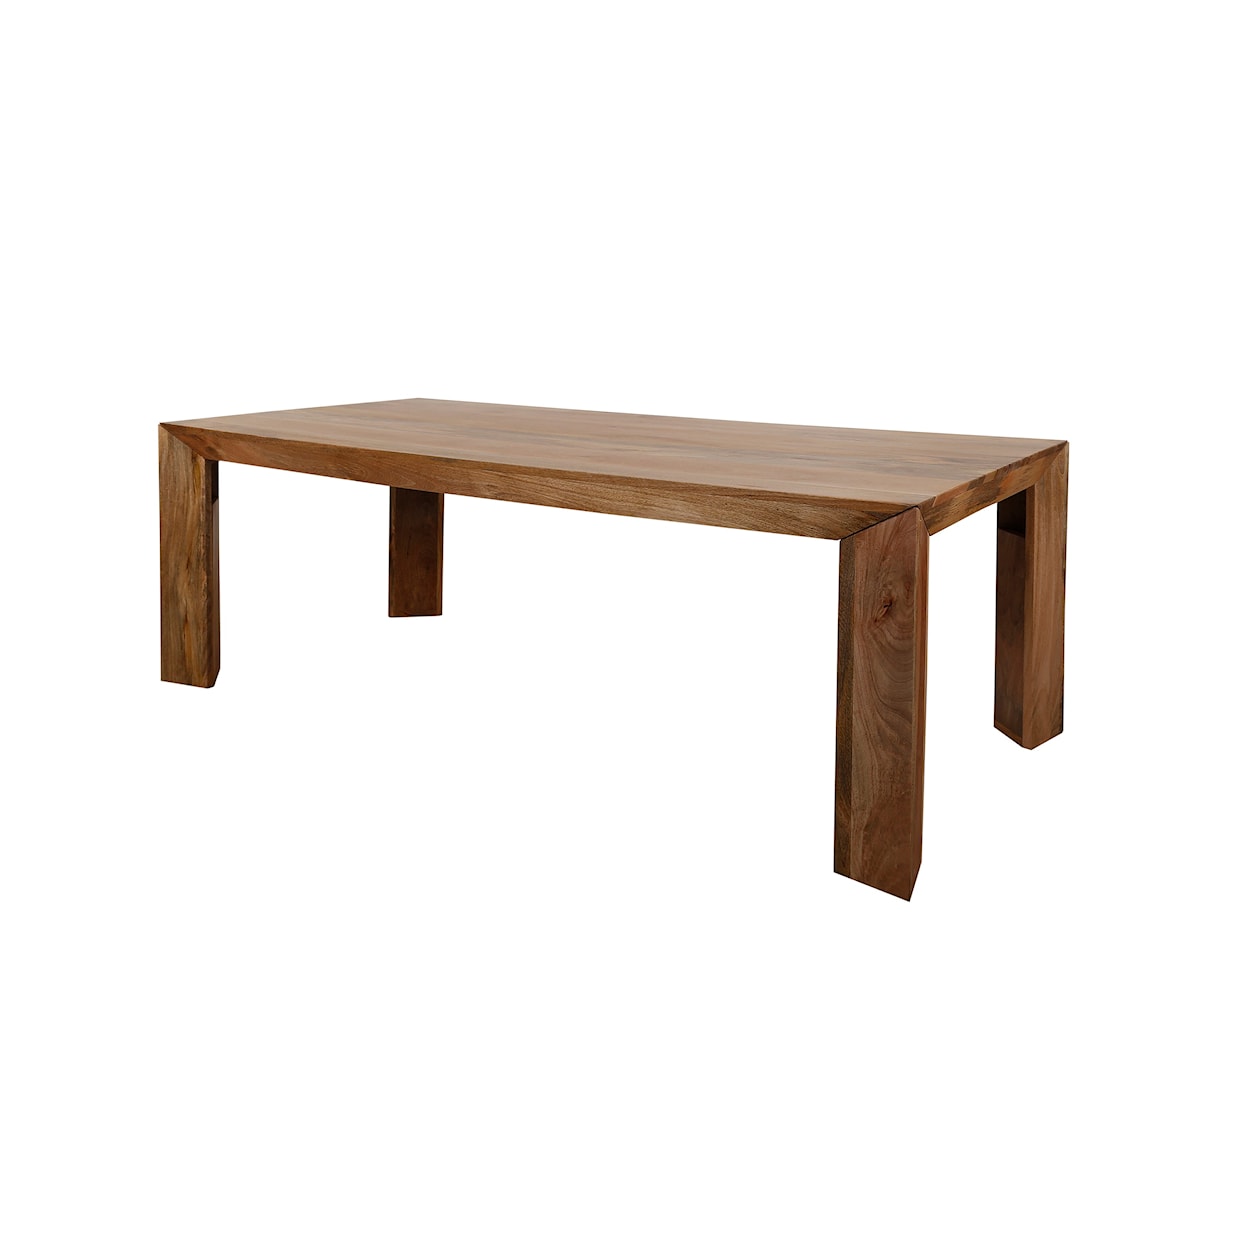 PH Crossings Downtown Dining Table